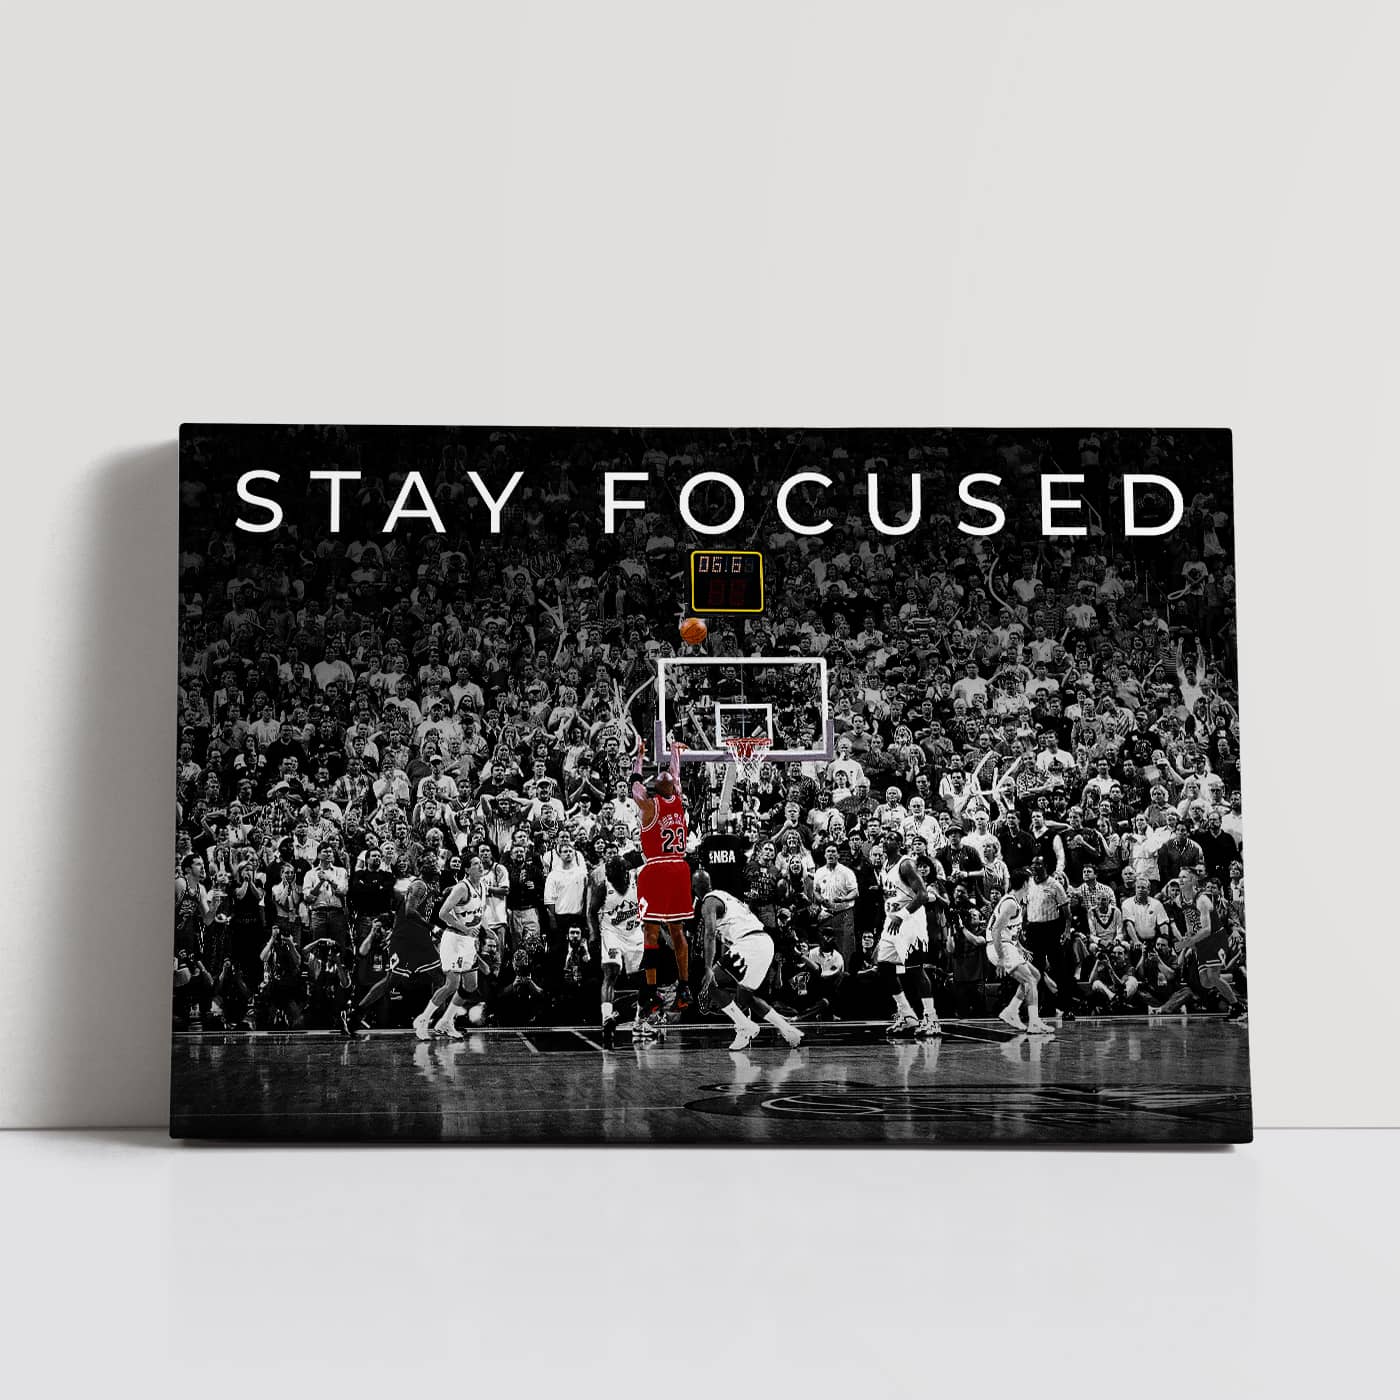 Stay Focused Canvas featuring the iconic image of Michael Jordan sinking the heart-stopping buzzer-beater shot against the Cleveland Cavaliers